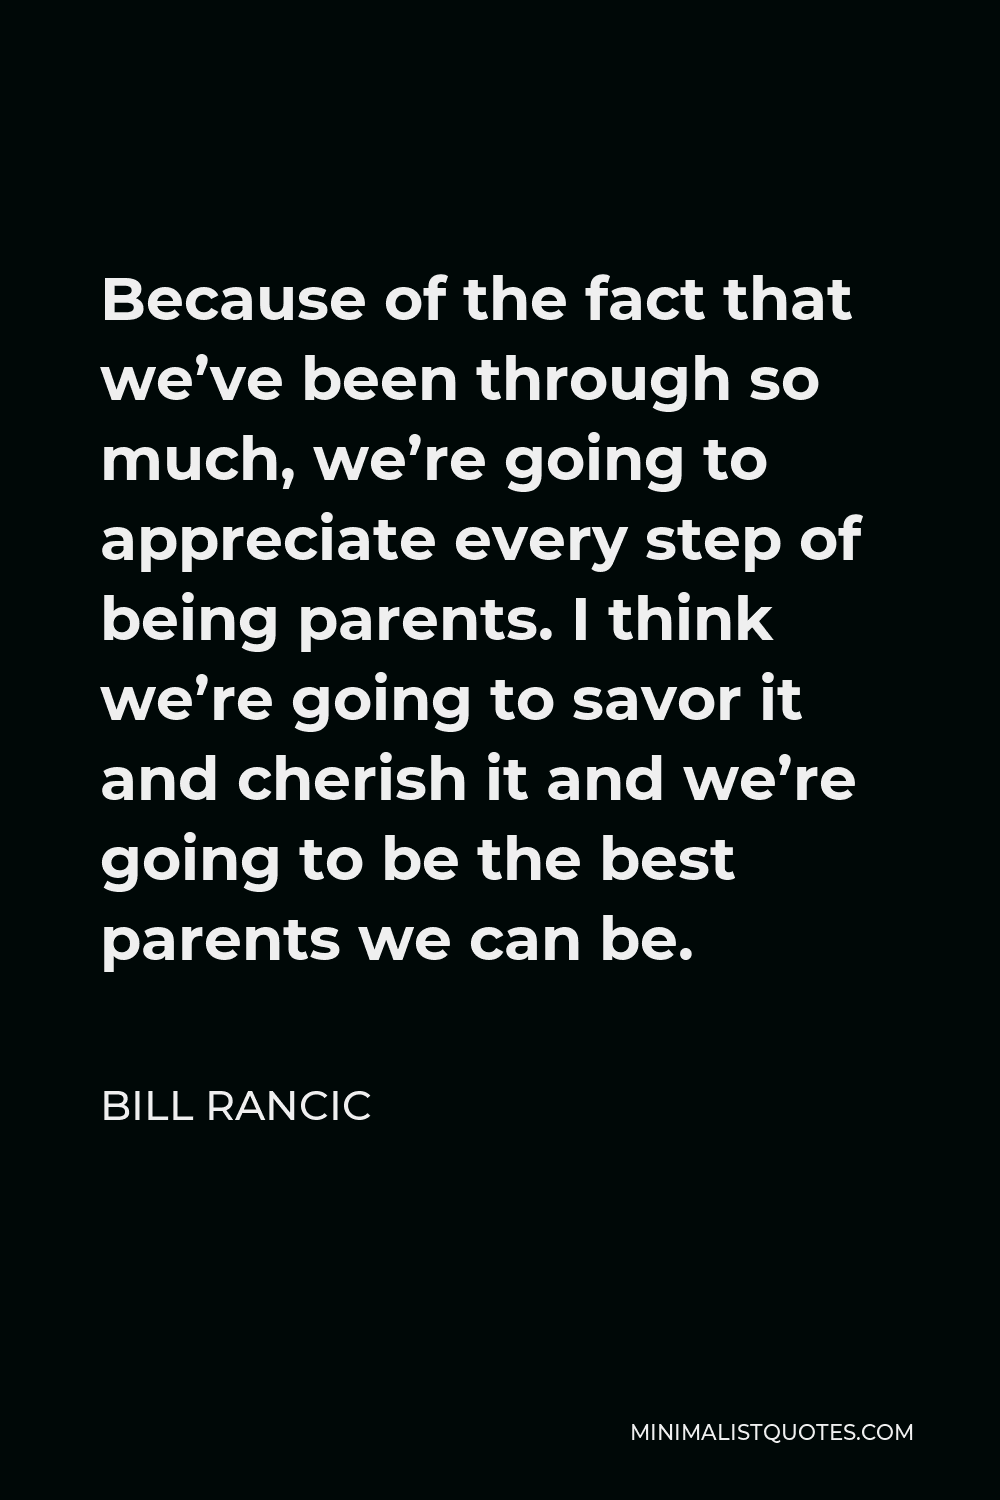 Bill Rancic Quote - Because of the fact that we’ve been through so much, we’re going to appreciate every step of being parents. I think we’re going to savor it and cherish it and we’re going to be the best parents we can be.